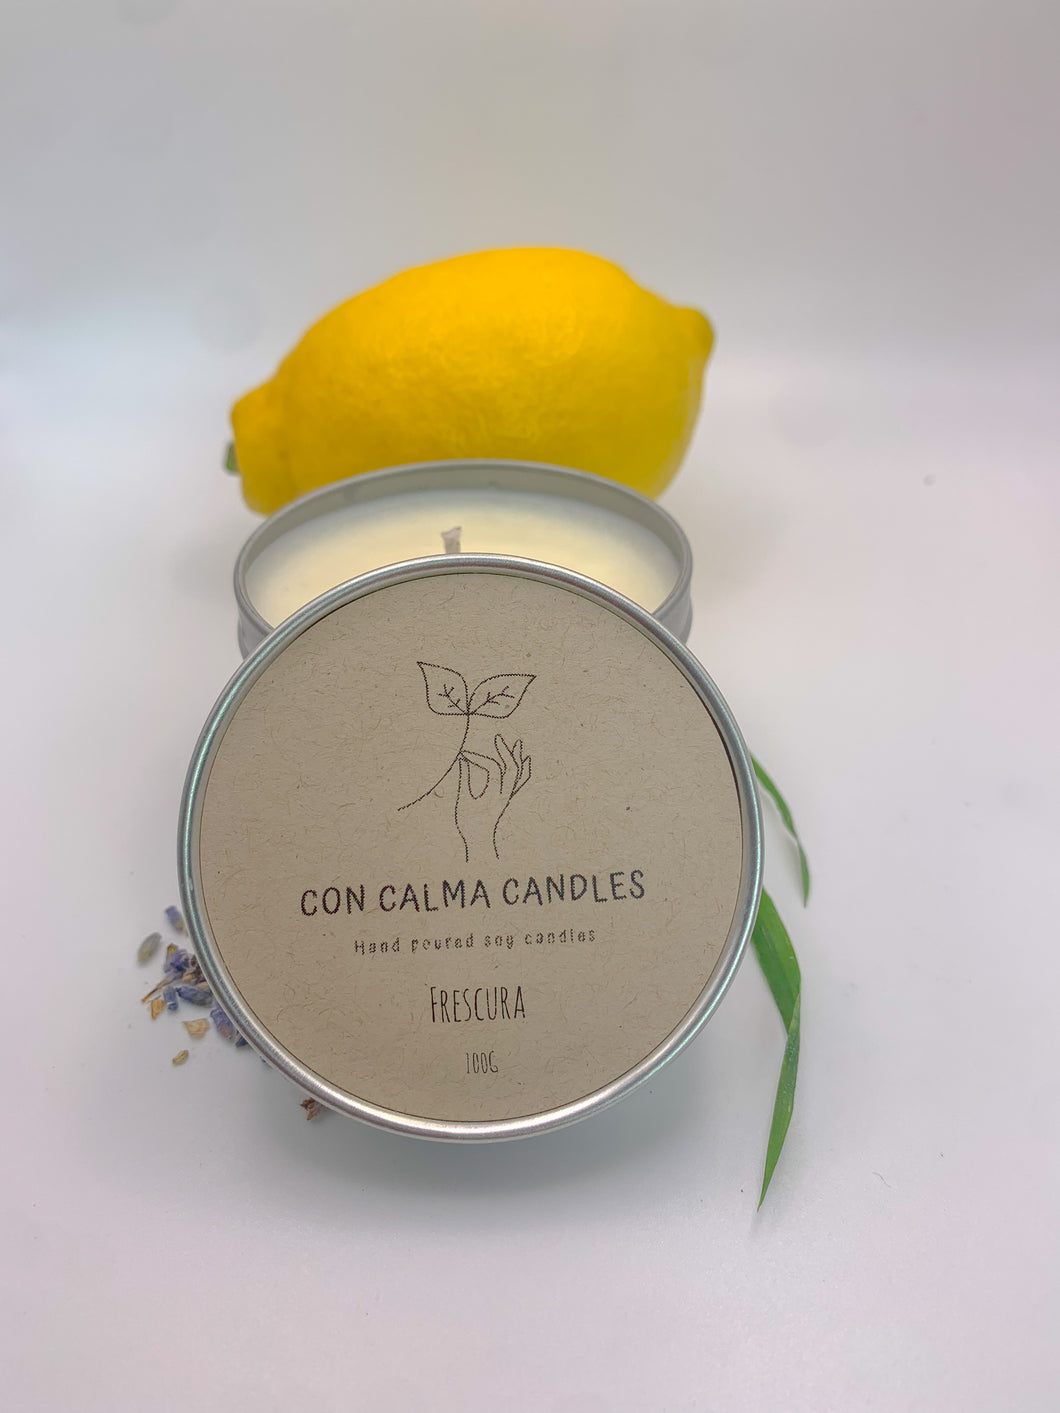 Frescura soy wax candle